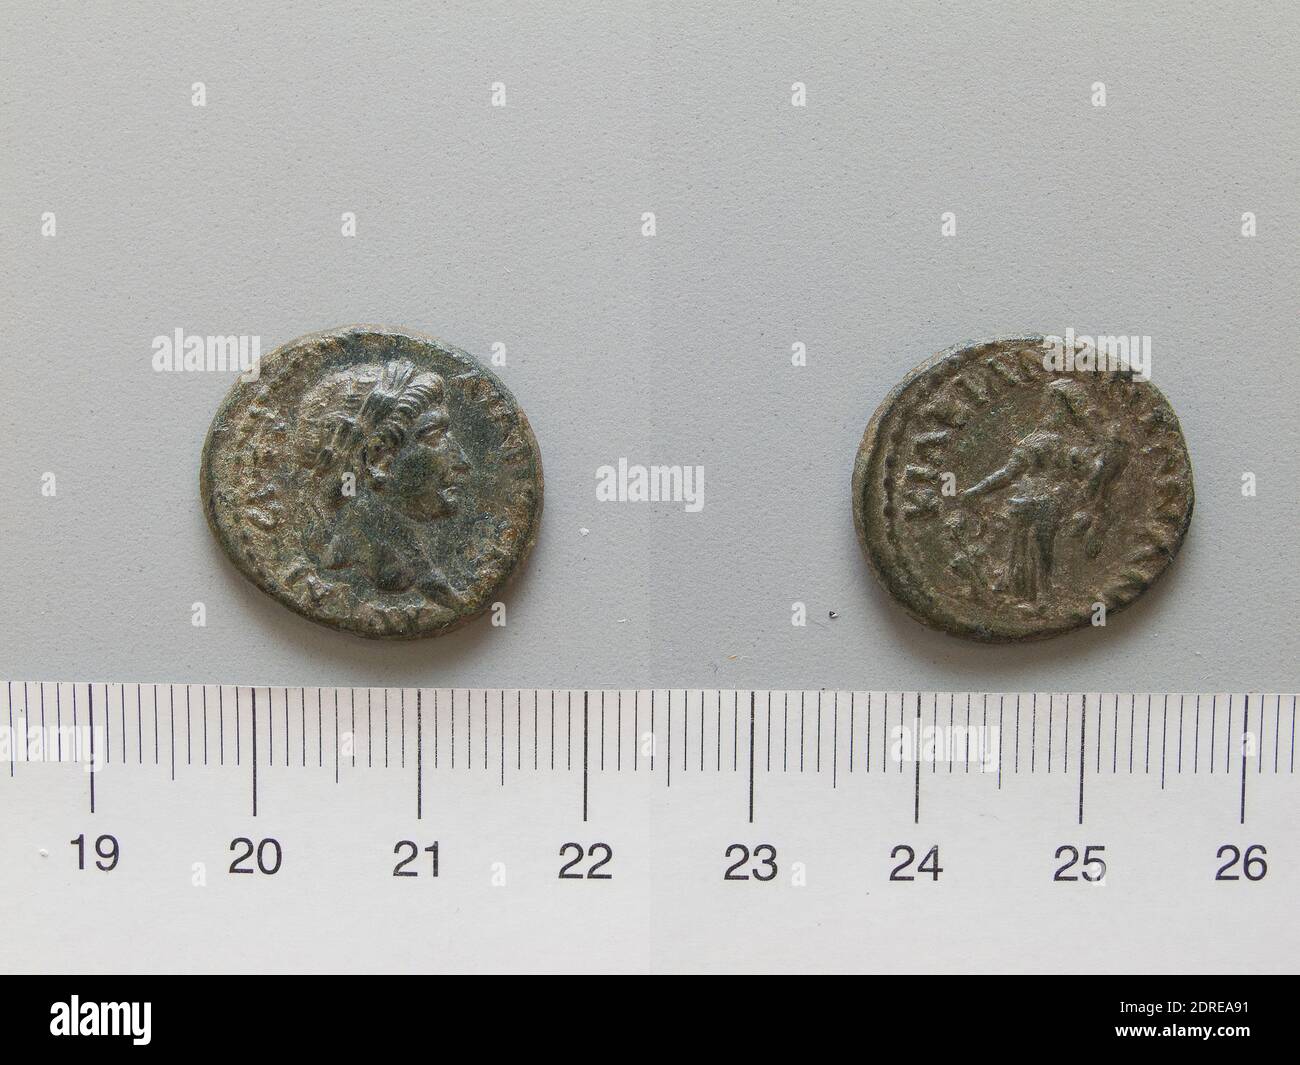 Ruler: Trajan, Emperor of Rome, A.D. 53–117, ruled 98–117, Mint: Cilbiani Inferiores, Coin of Trajan, Emperor of Rome from Cilbiani Inferiores, A.D. 98–117, Copper, 4.68 g, 12:00, 21.5 mm, Made in Cilbiani Inferiores, Lydia, Greek, 1st–2nd century A.D., Numismatics Stock Photo